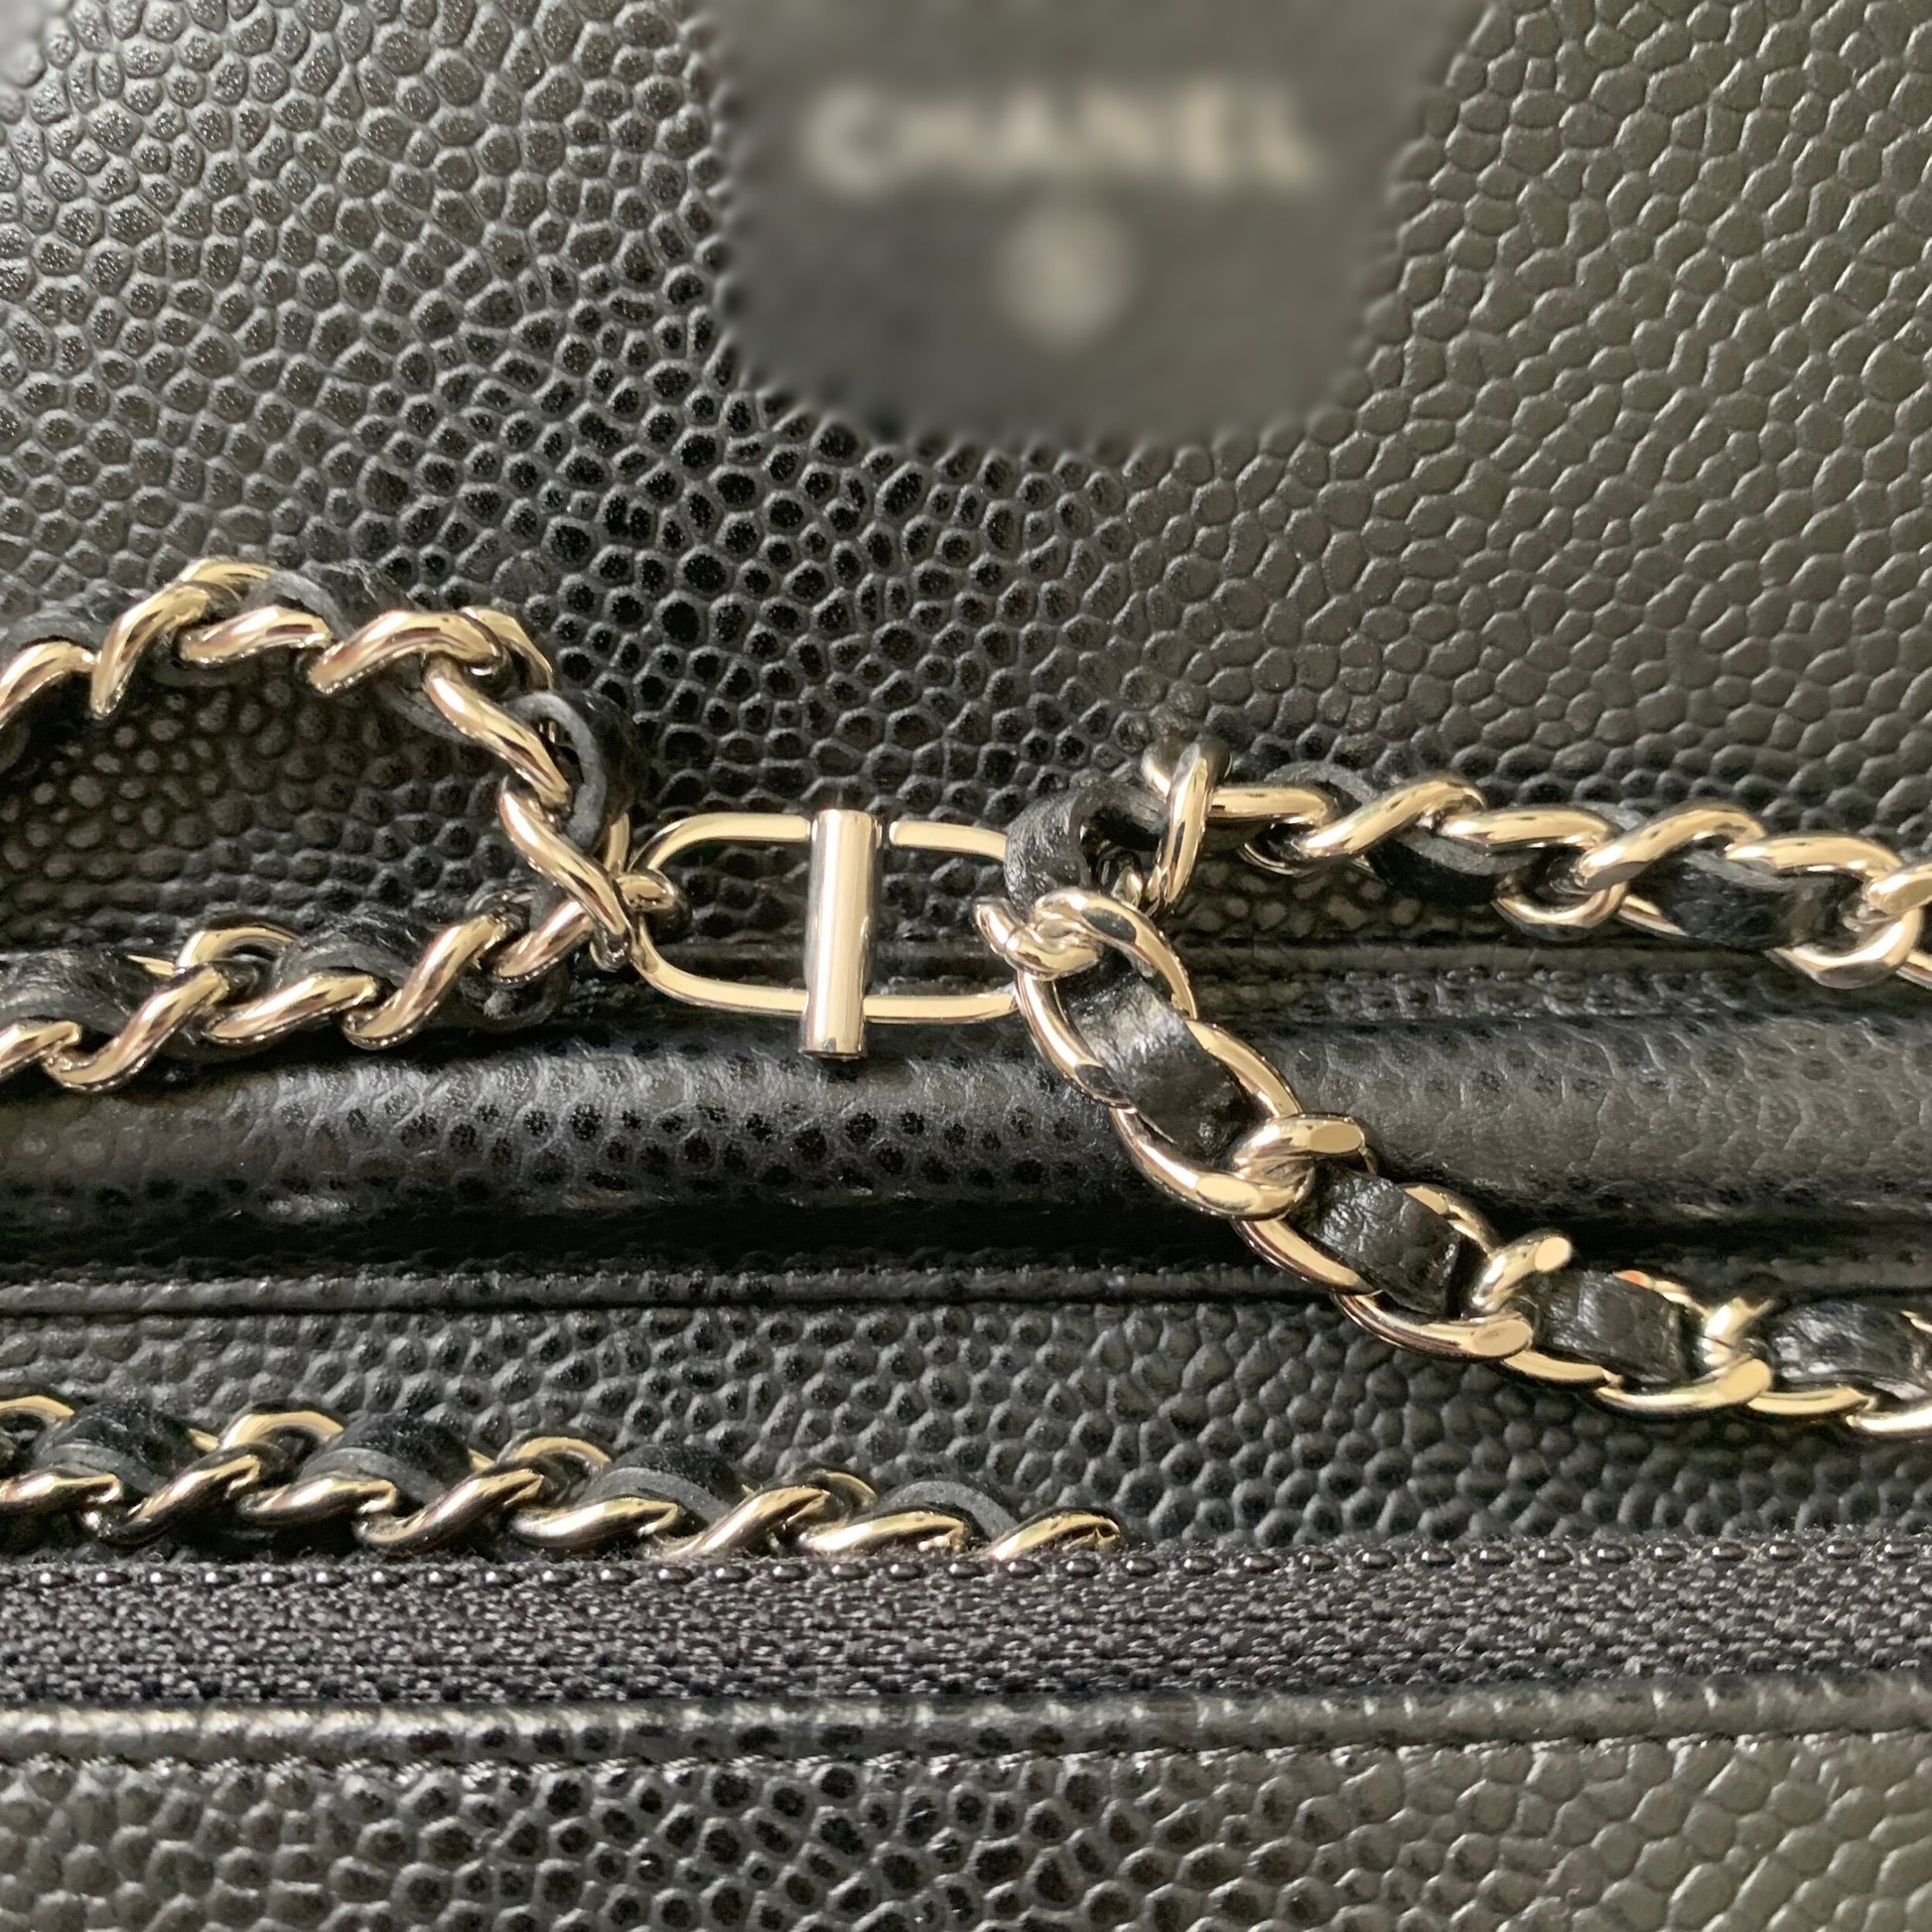 HOW TO SHORTEN THE CHAIN STRAP OF YOUR HANDBAG